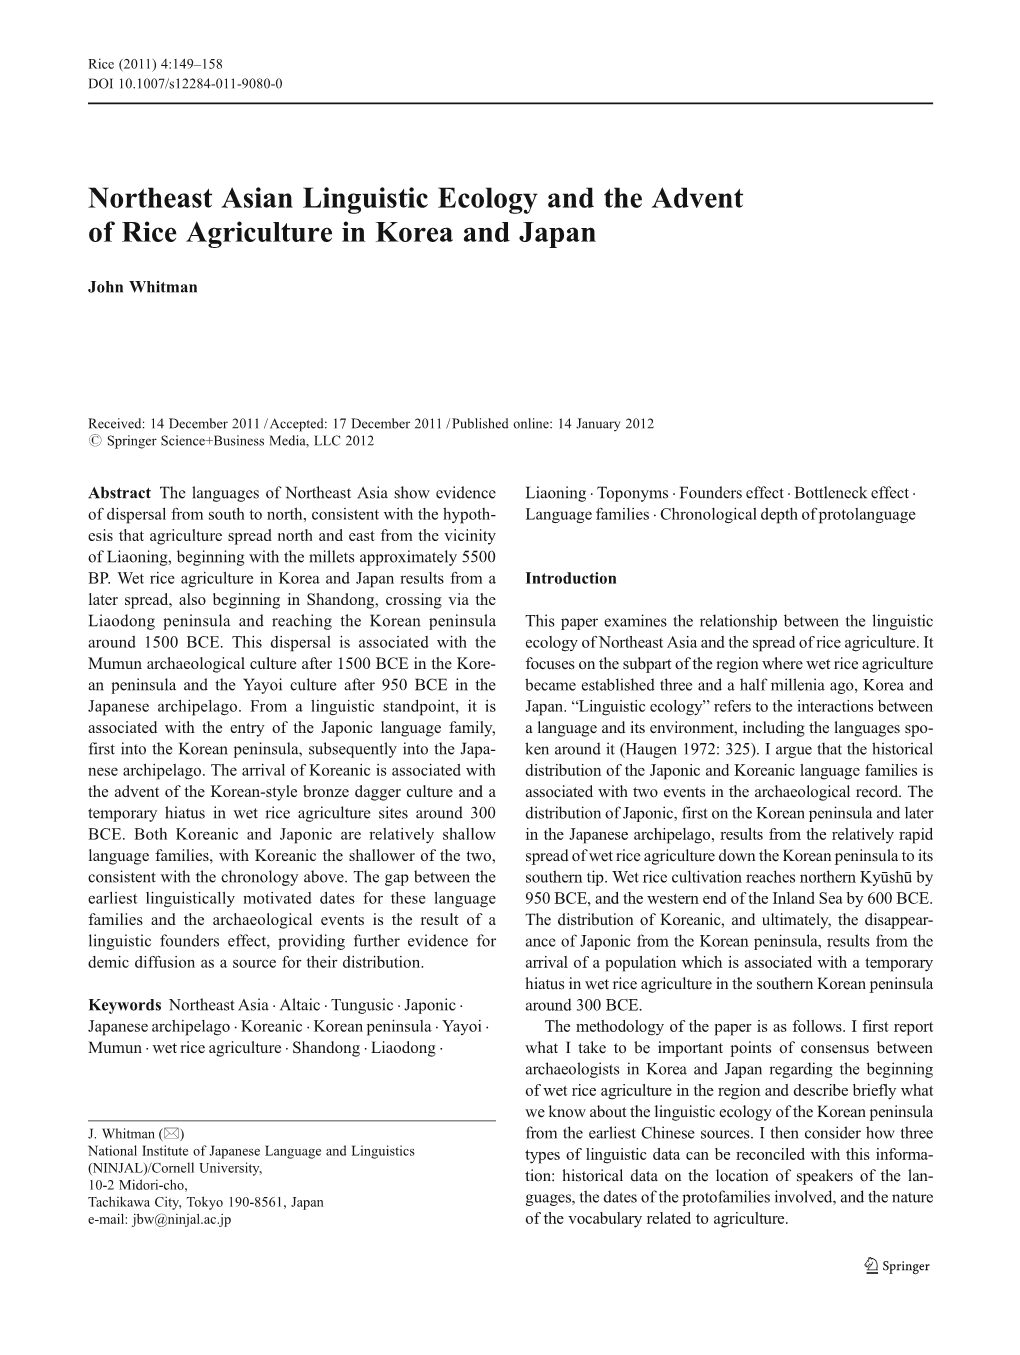 Northeast Asian Linguistic Ecology and the Advent of Rice Agriculture in Korea and Japan